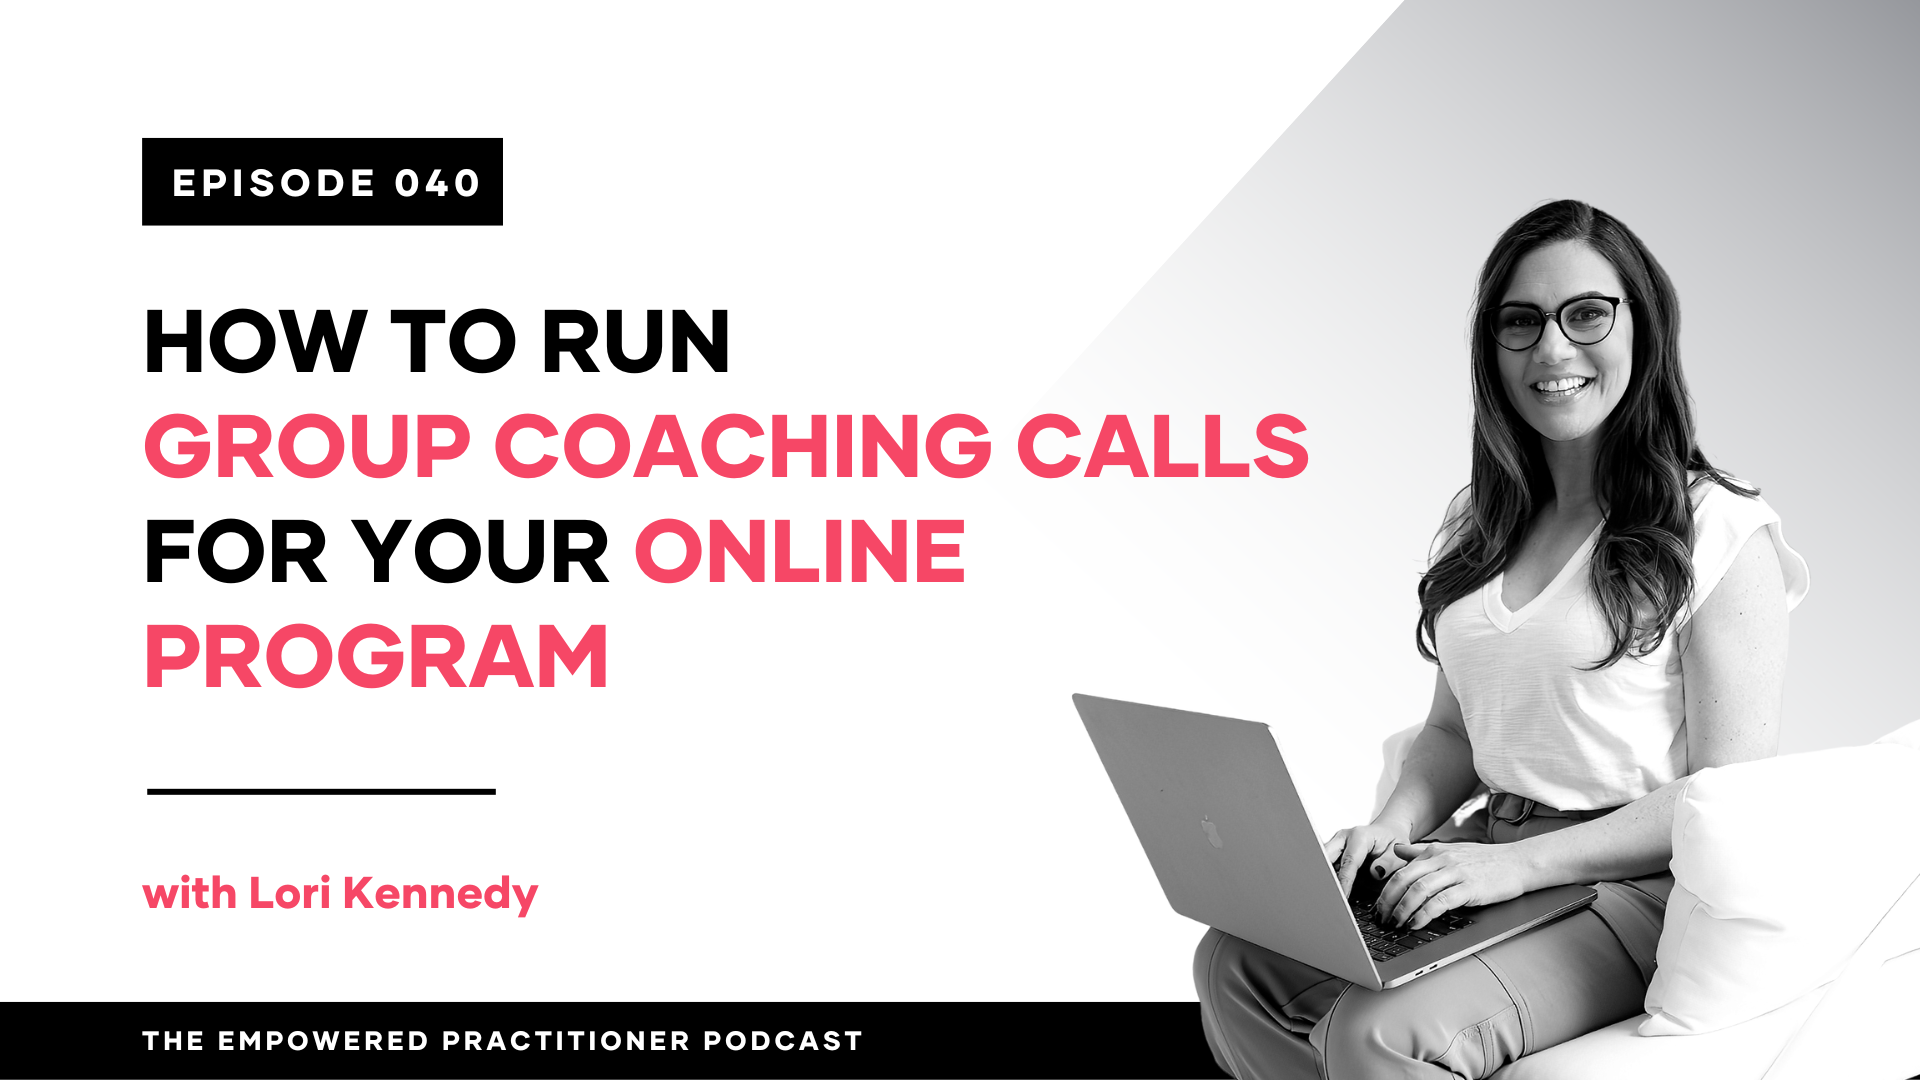 HOW TO RUN GROUP COACHING CALLS FOR YOUR ONLINE PROGRAM